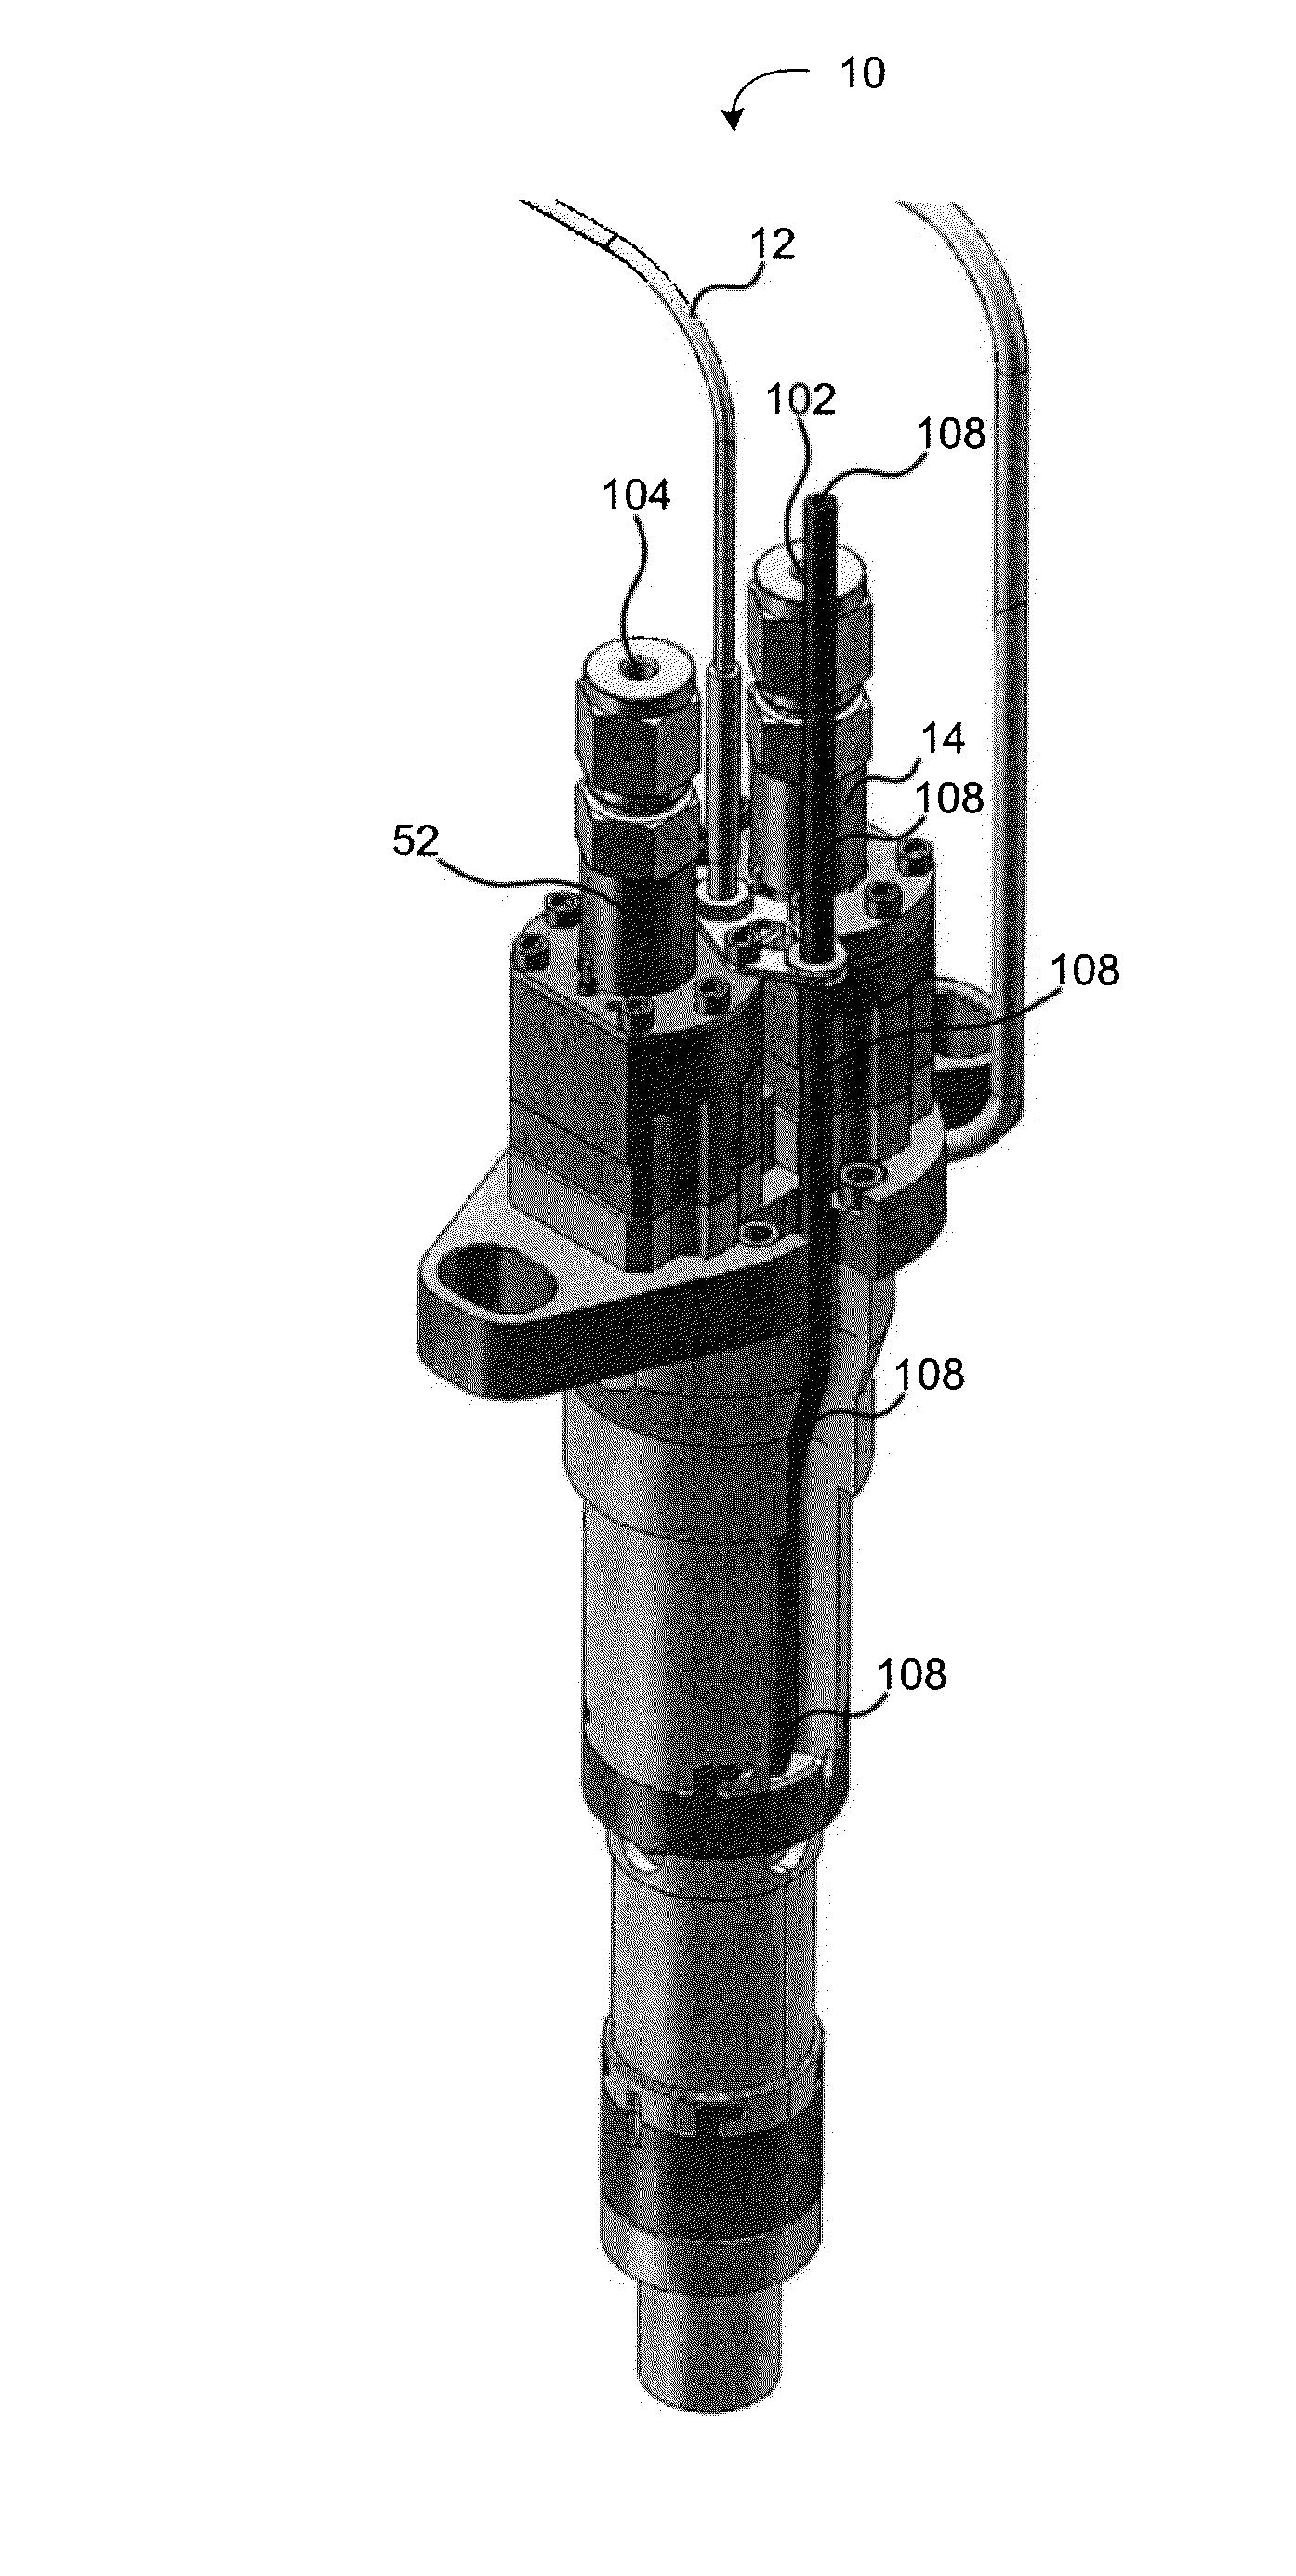 Dual solenoid fuel injector with catalytic activator section